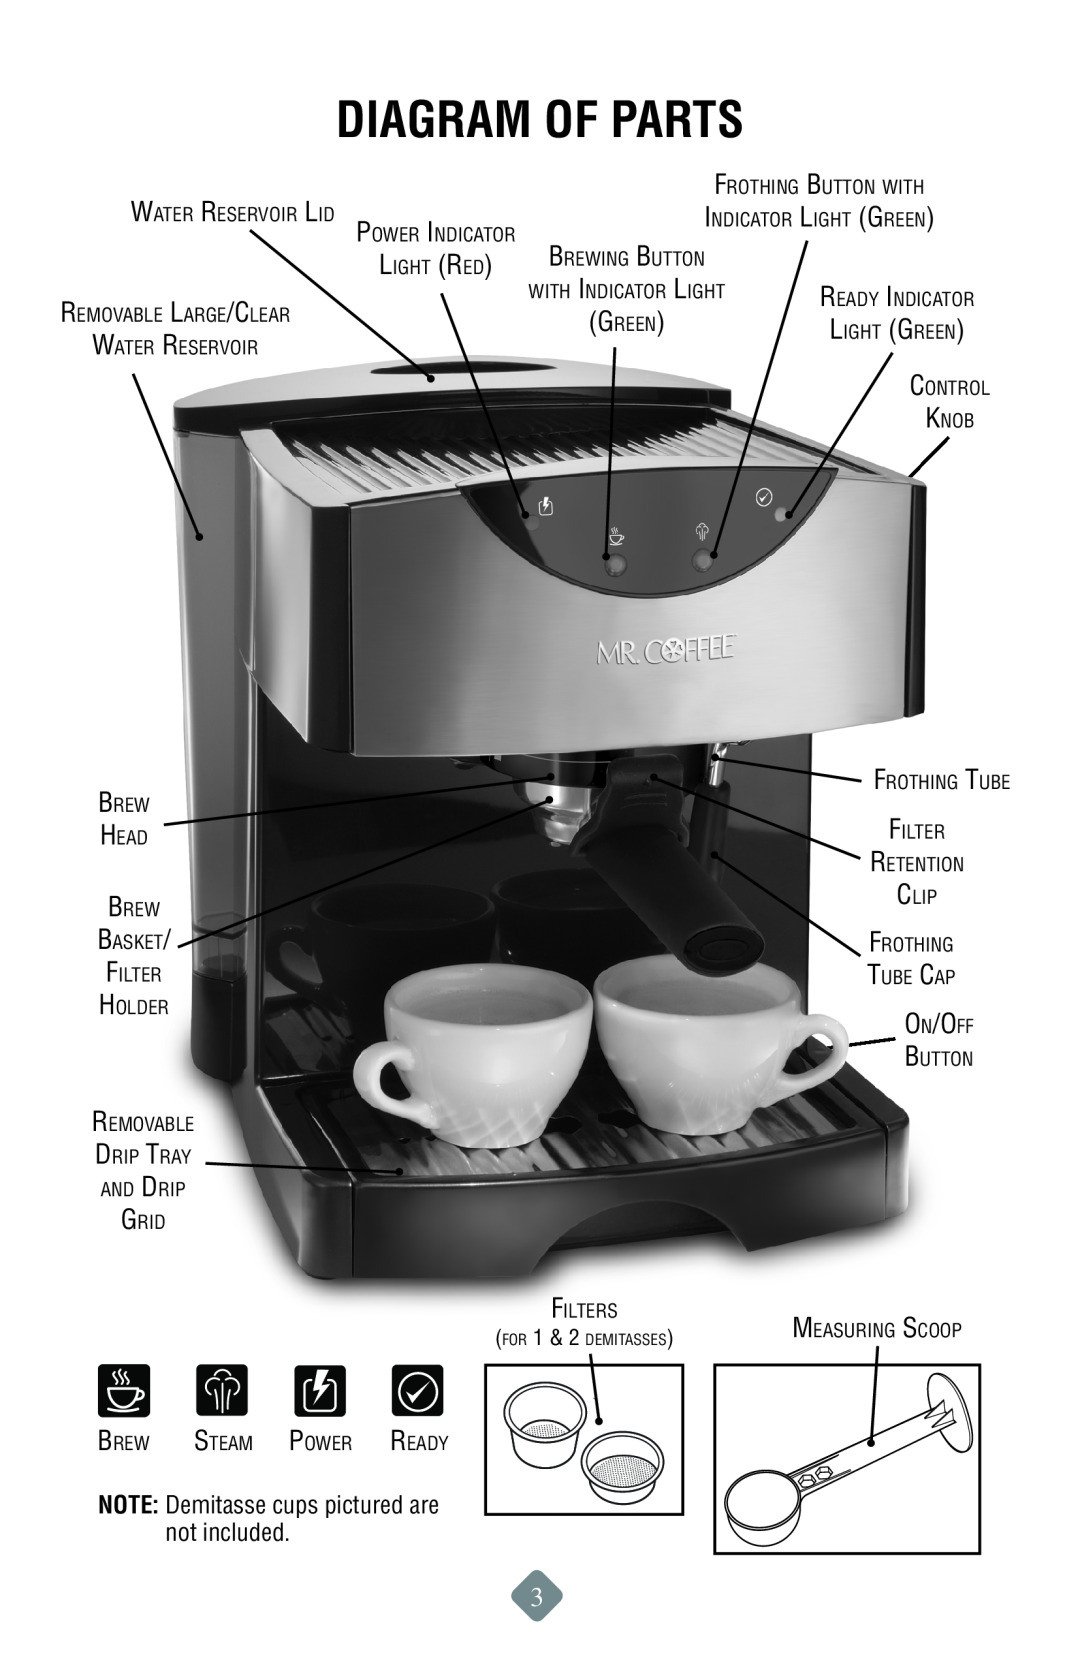 Mr. Coffee ECMP50 instruction manual Diagram Of Parts, On/Off, NOTE Demitasse cups pictured are not included 